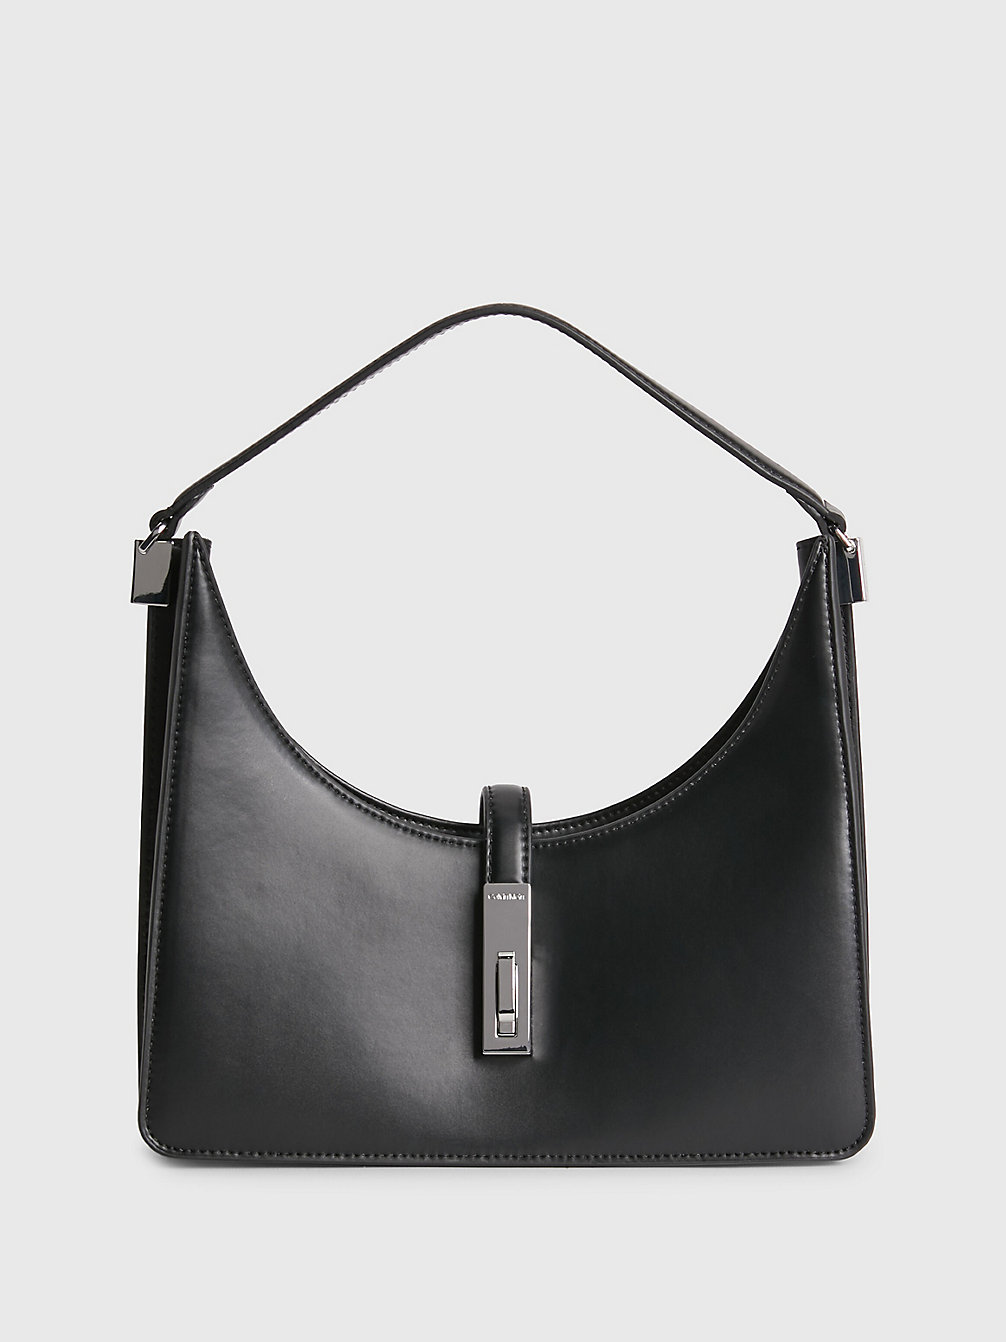 CK BLACK Small Recycled Shoulder Bag undefined women Calvin Klein